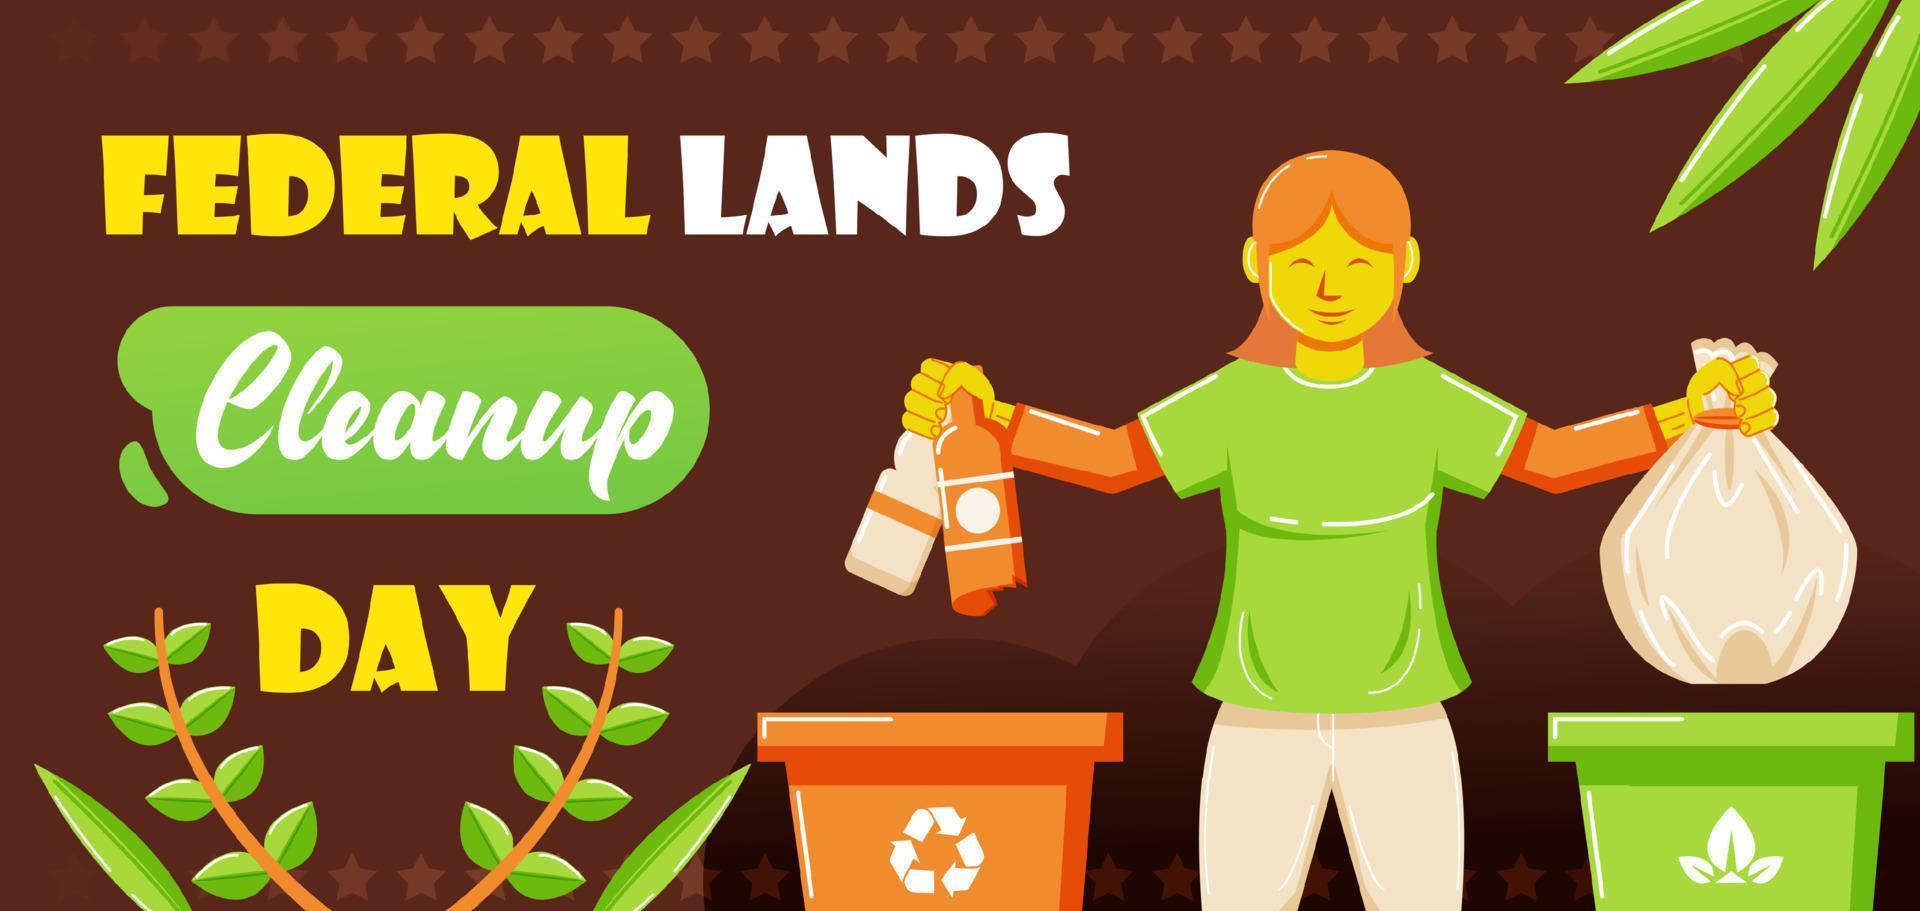 Federal Lands Cleanup Day, separation of organic and non-organic waste vector